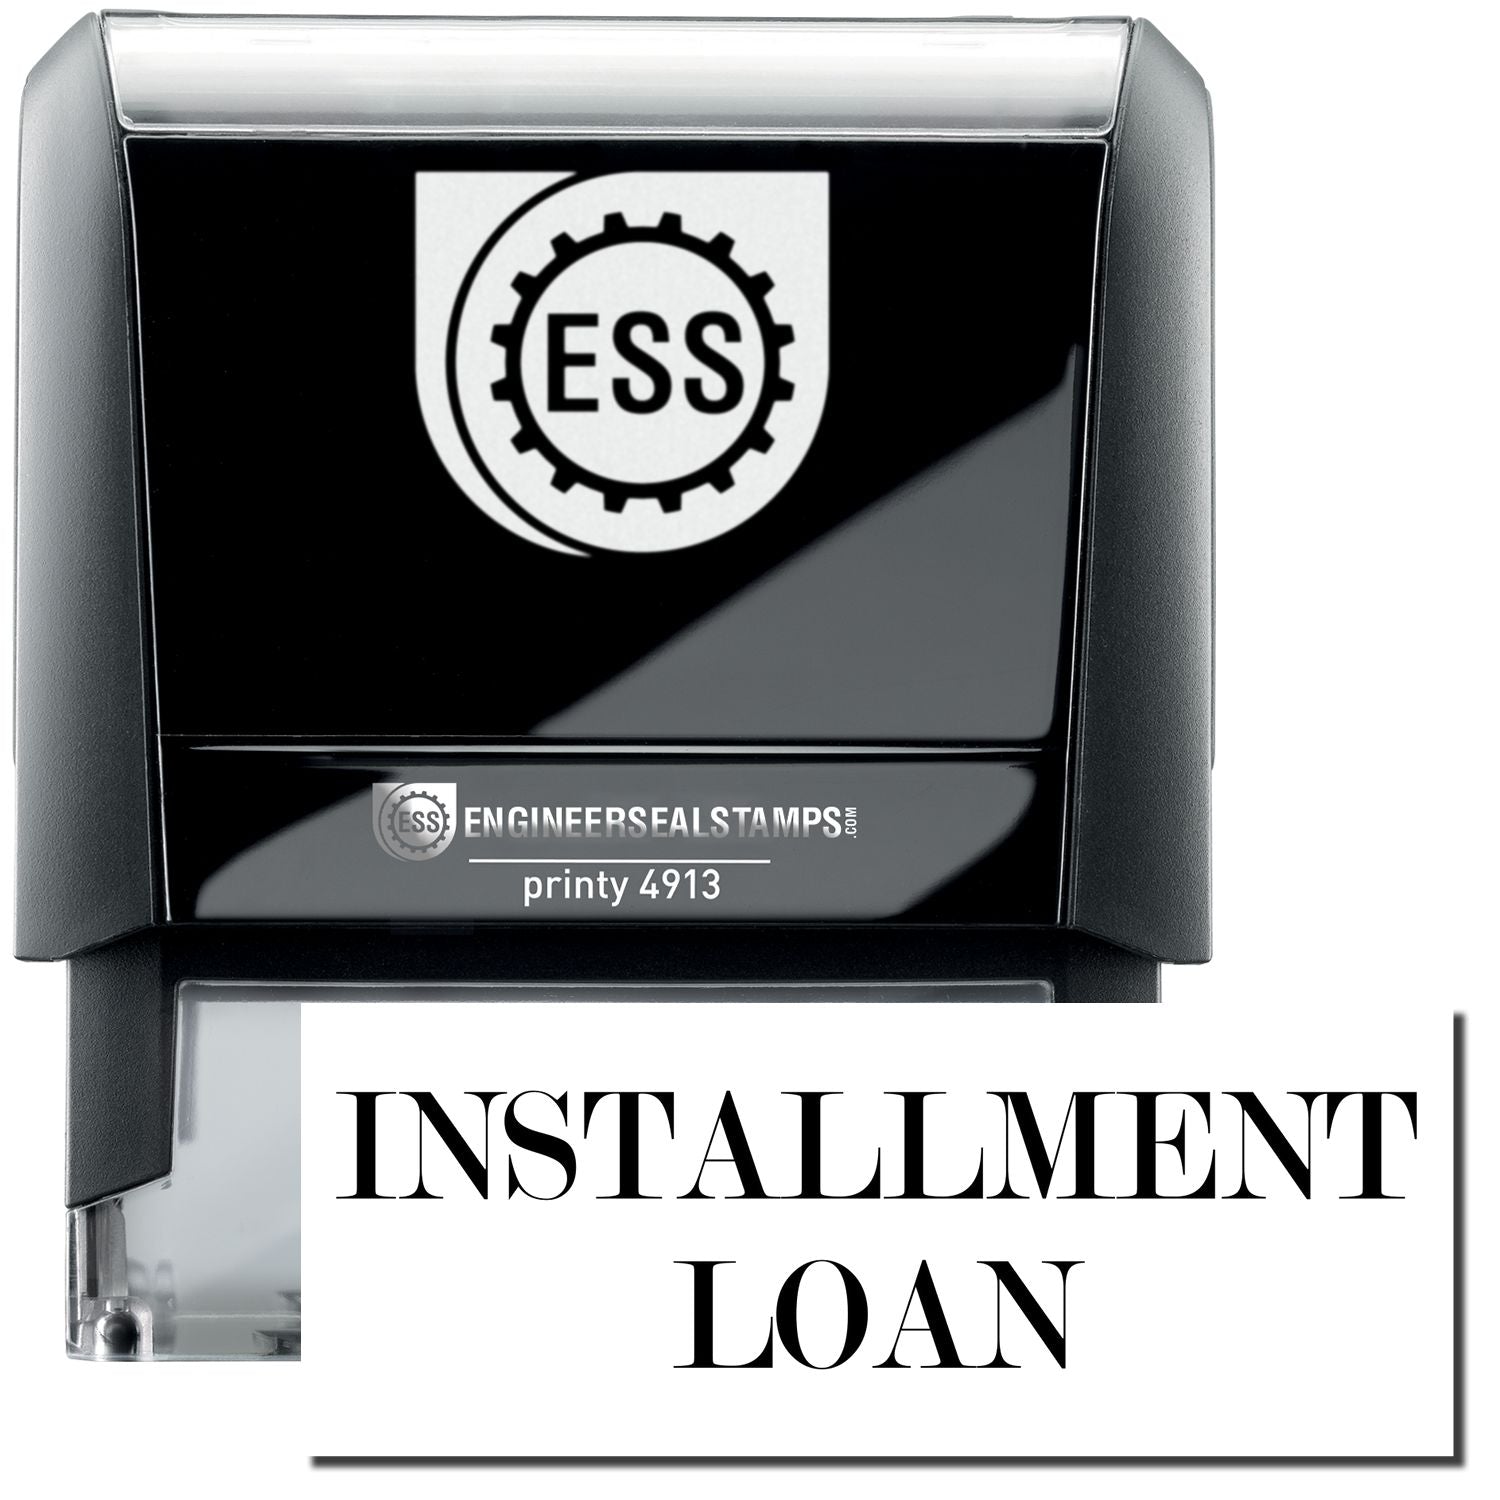 A self-inking stamp with a stamped image showing how the text "INSTALLMENT LOAN" in a large bold font is displayed by it.